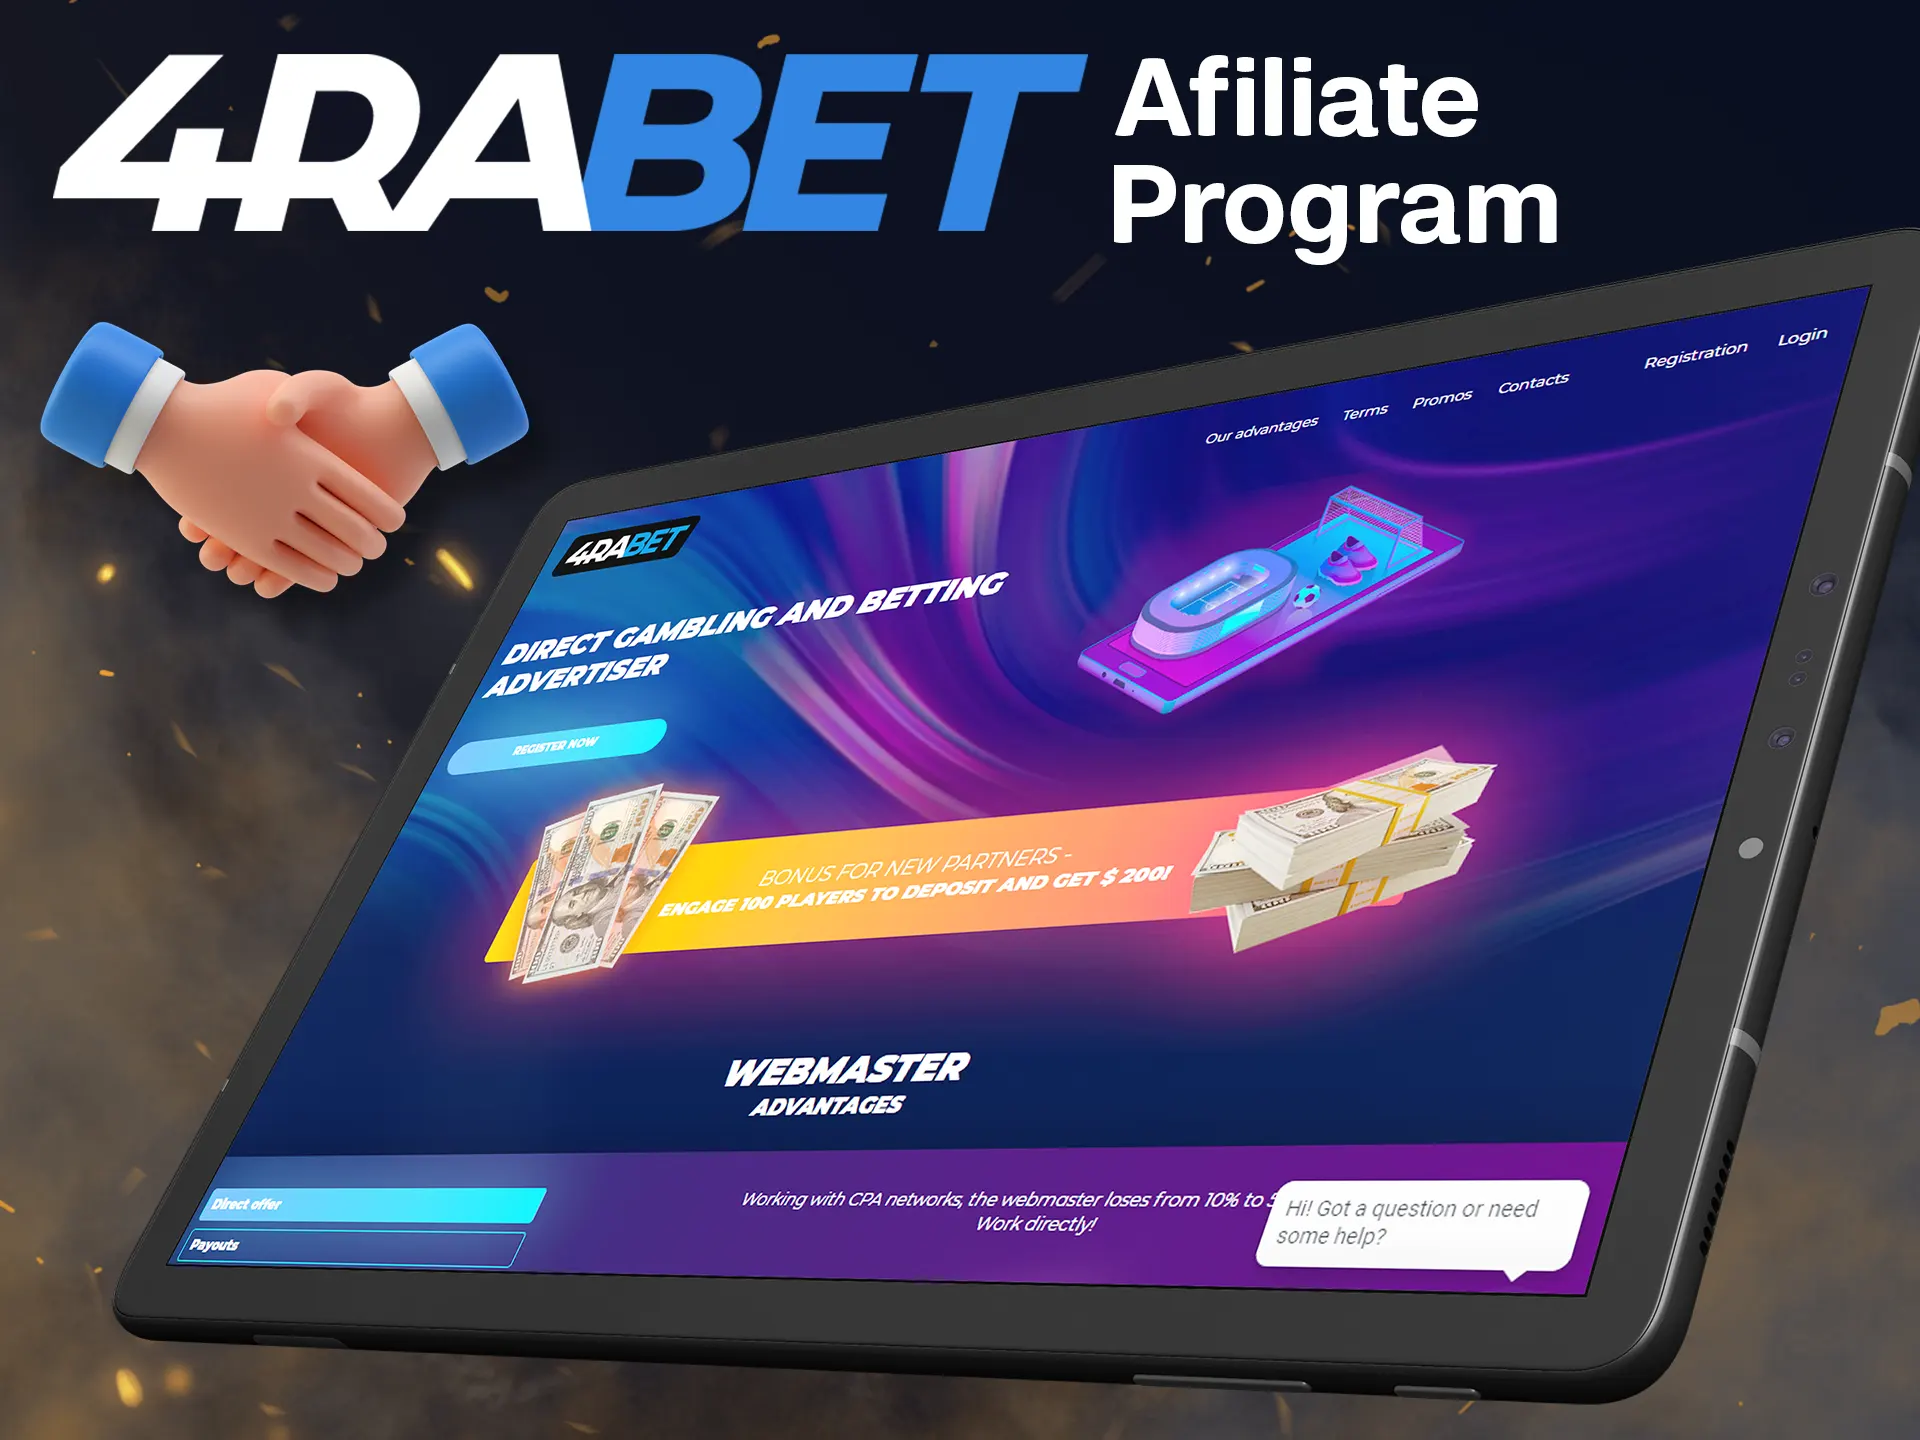 Invite your friends with 4rabet affiliate program.